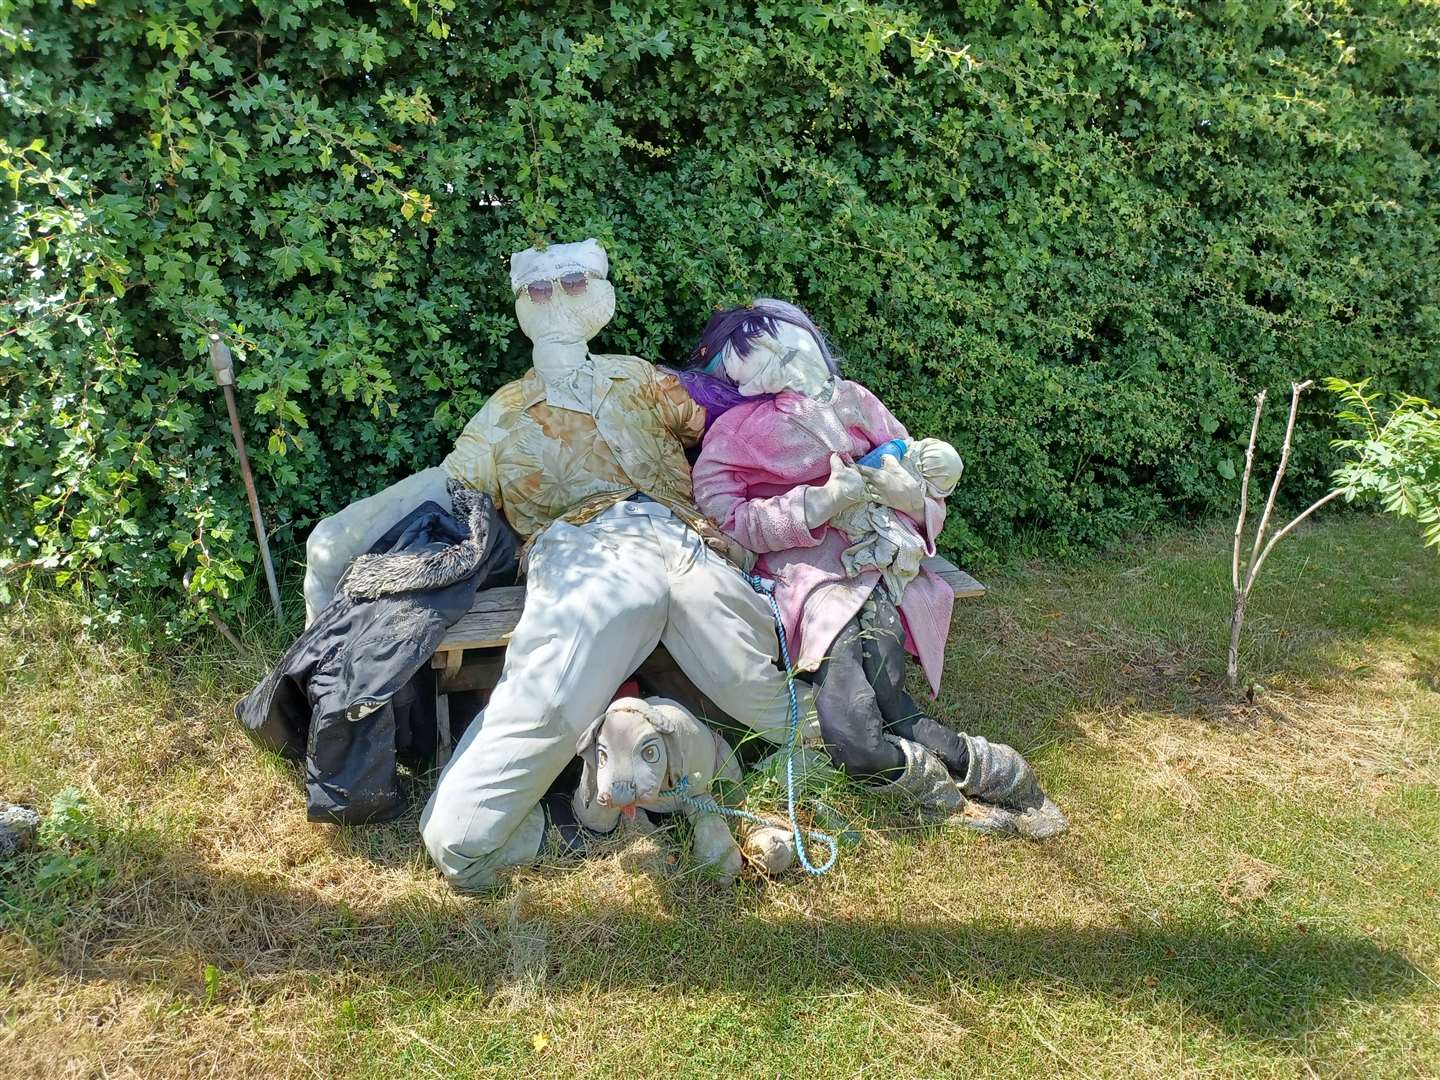 These somewhat world-weary scarecrows have remained in situ for the past two years